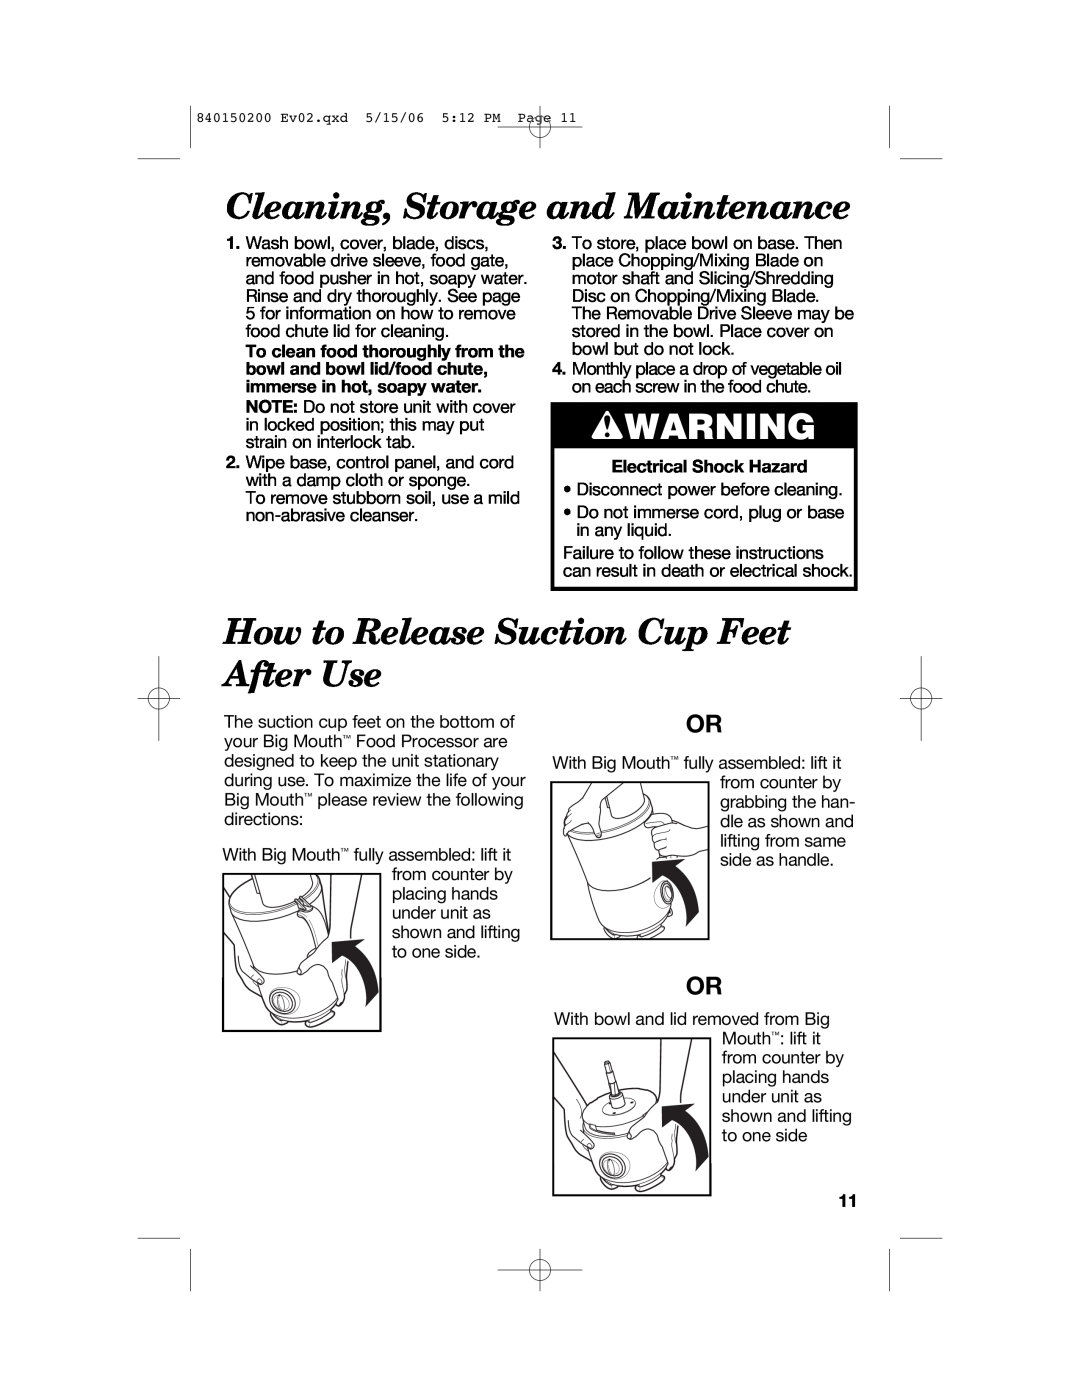 Proctor-Silex 840150200 manual Cleaning, Storage and Maintenance, How to Release Suction Cup Feet After Use, wWARNING 